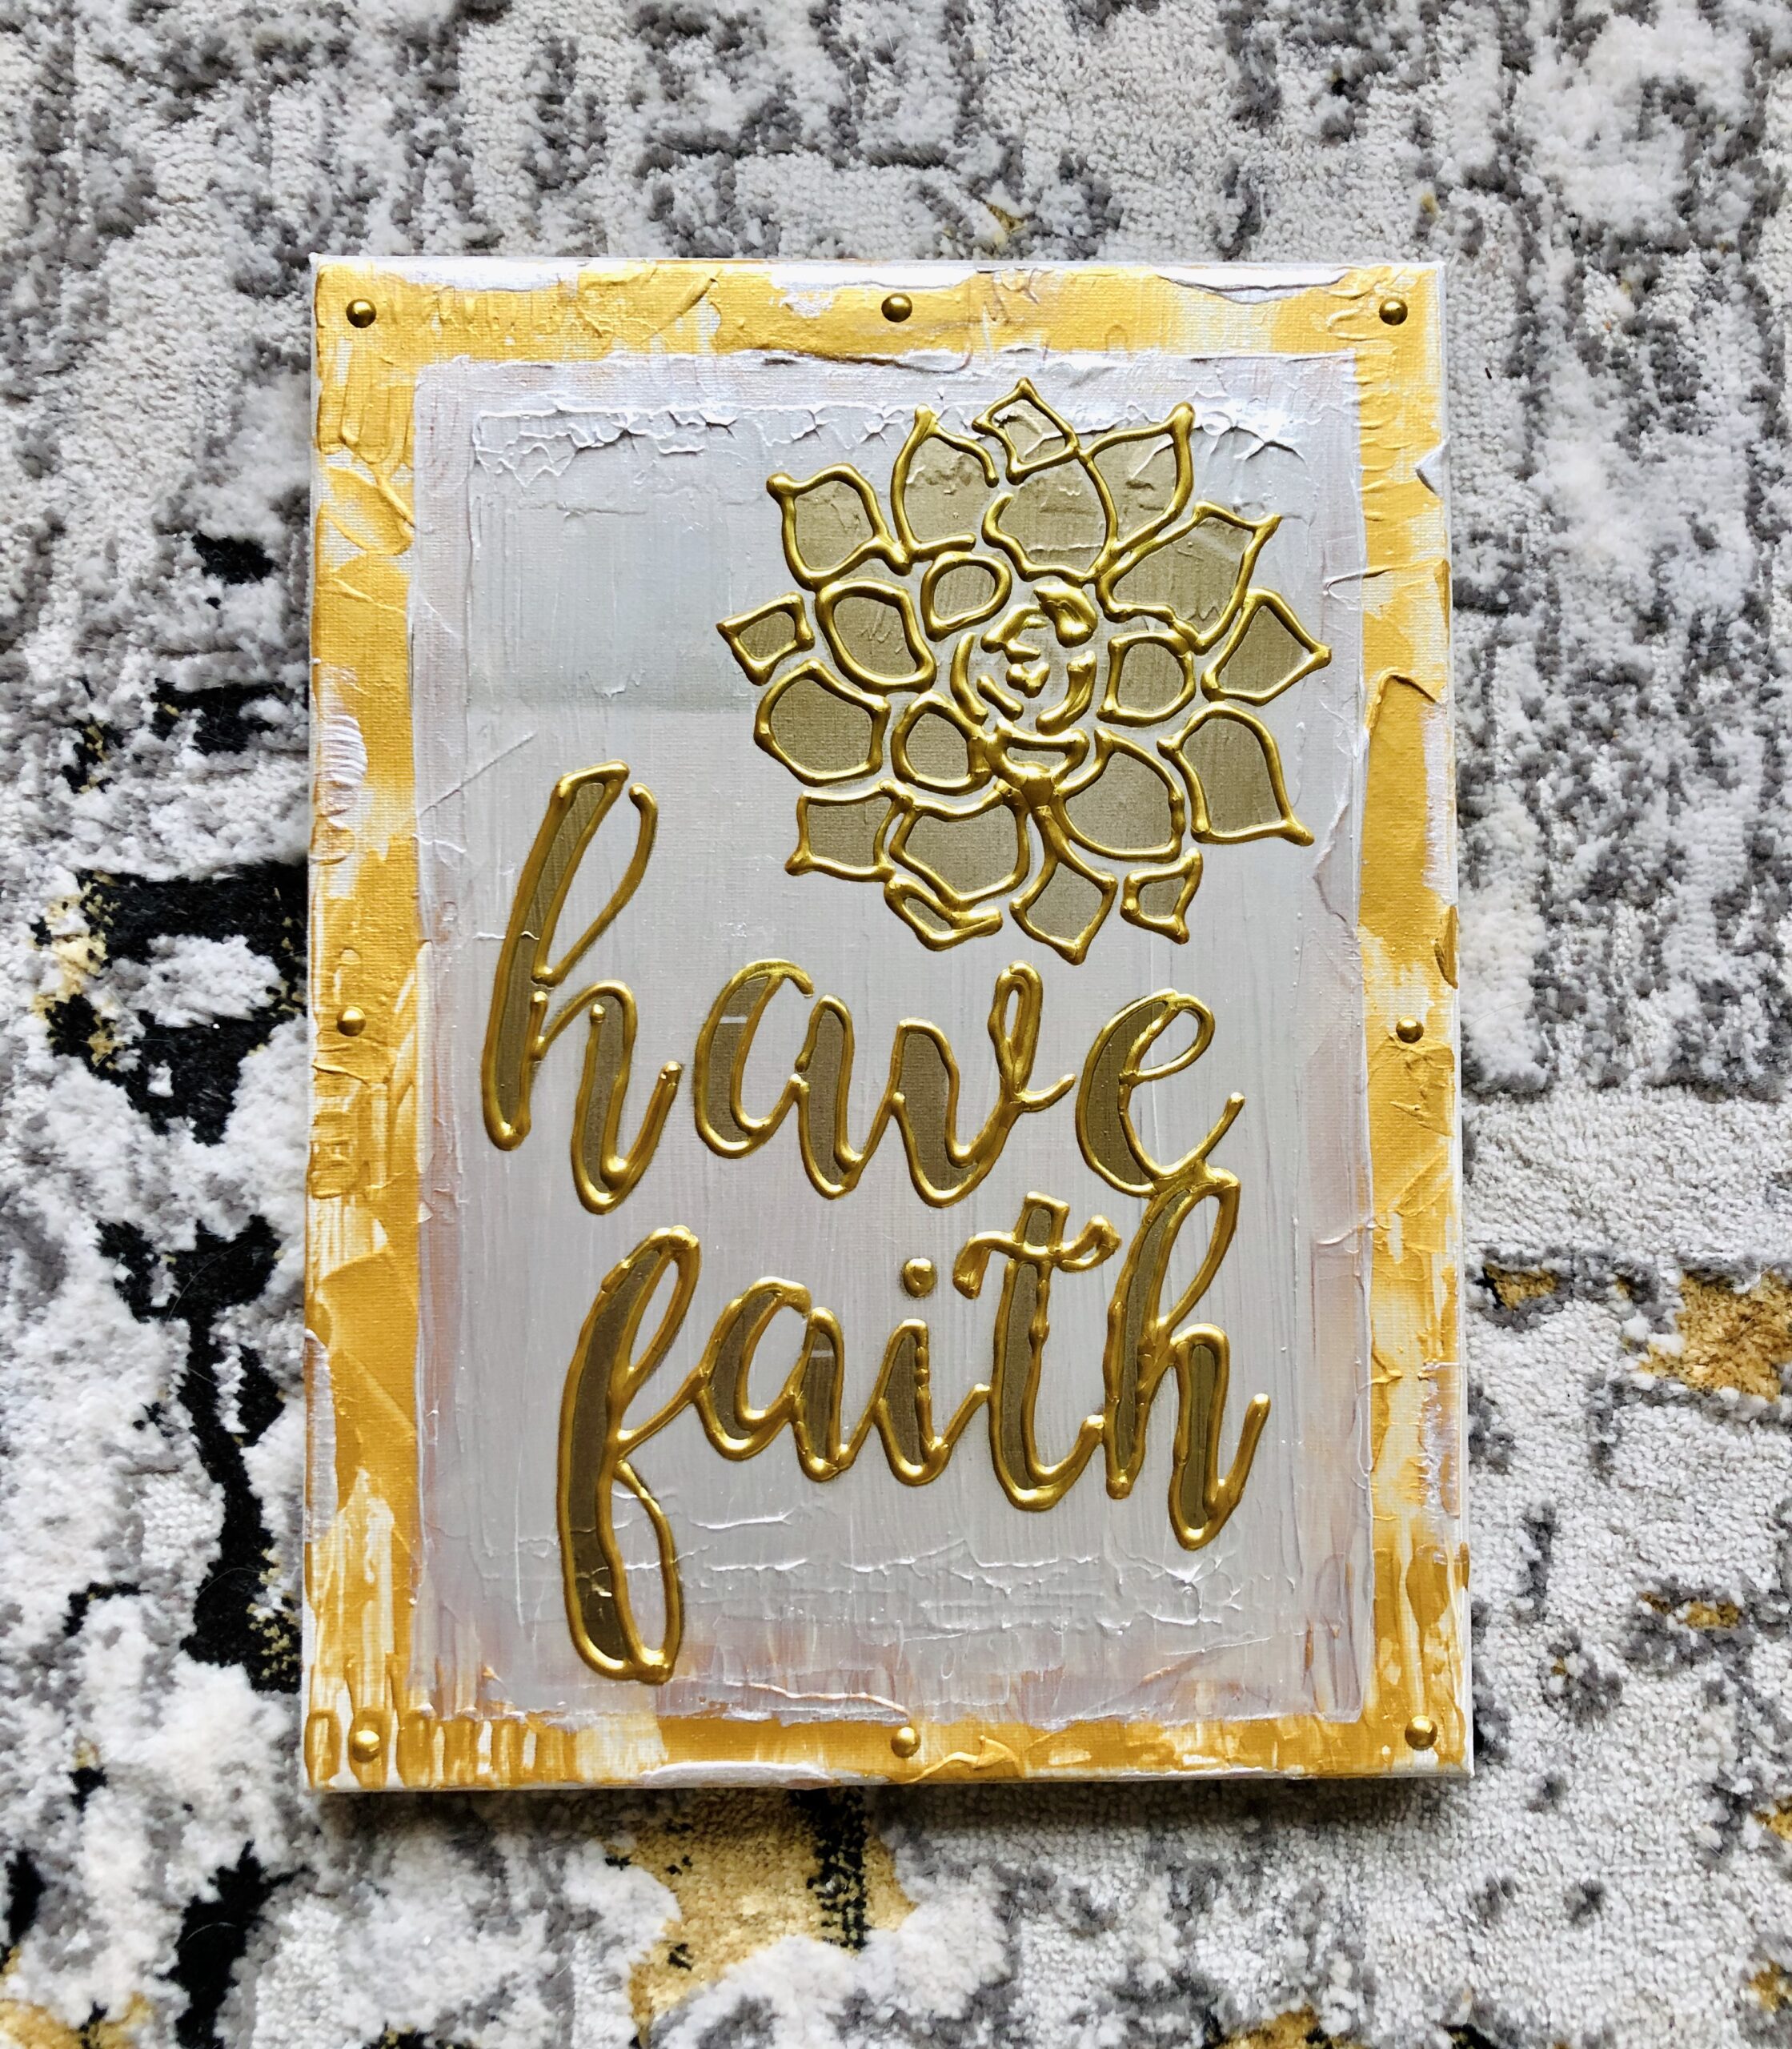 HAVE FAITH Brilliant U Coach Uplifting words Gift Shop pic 3